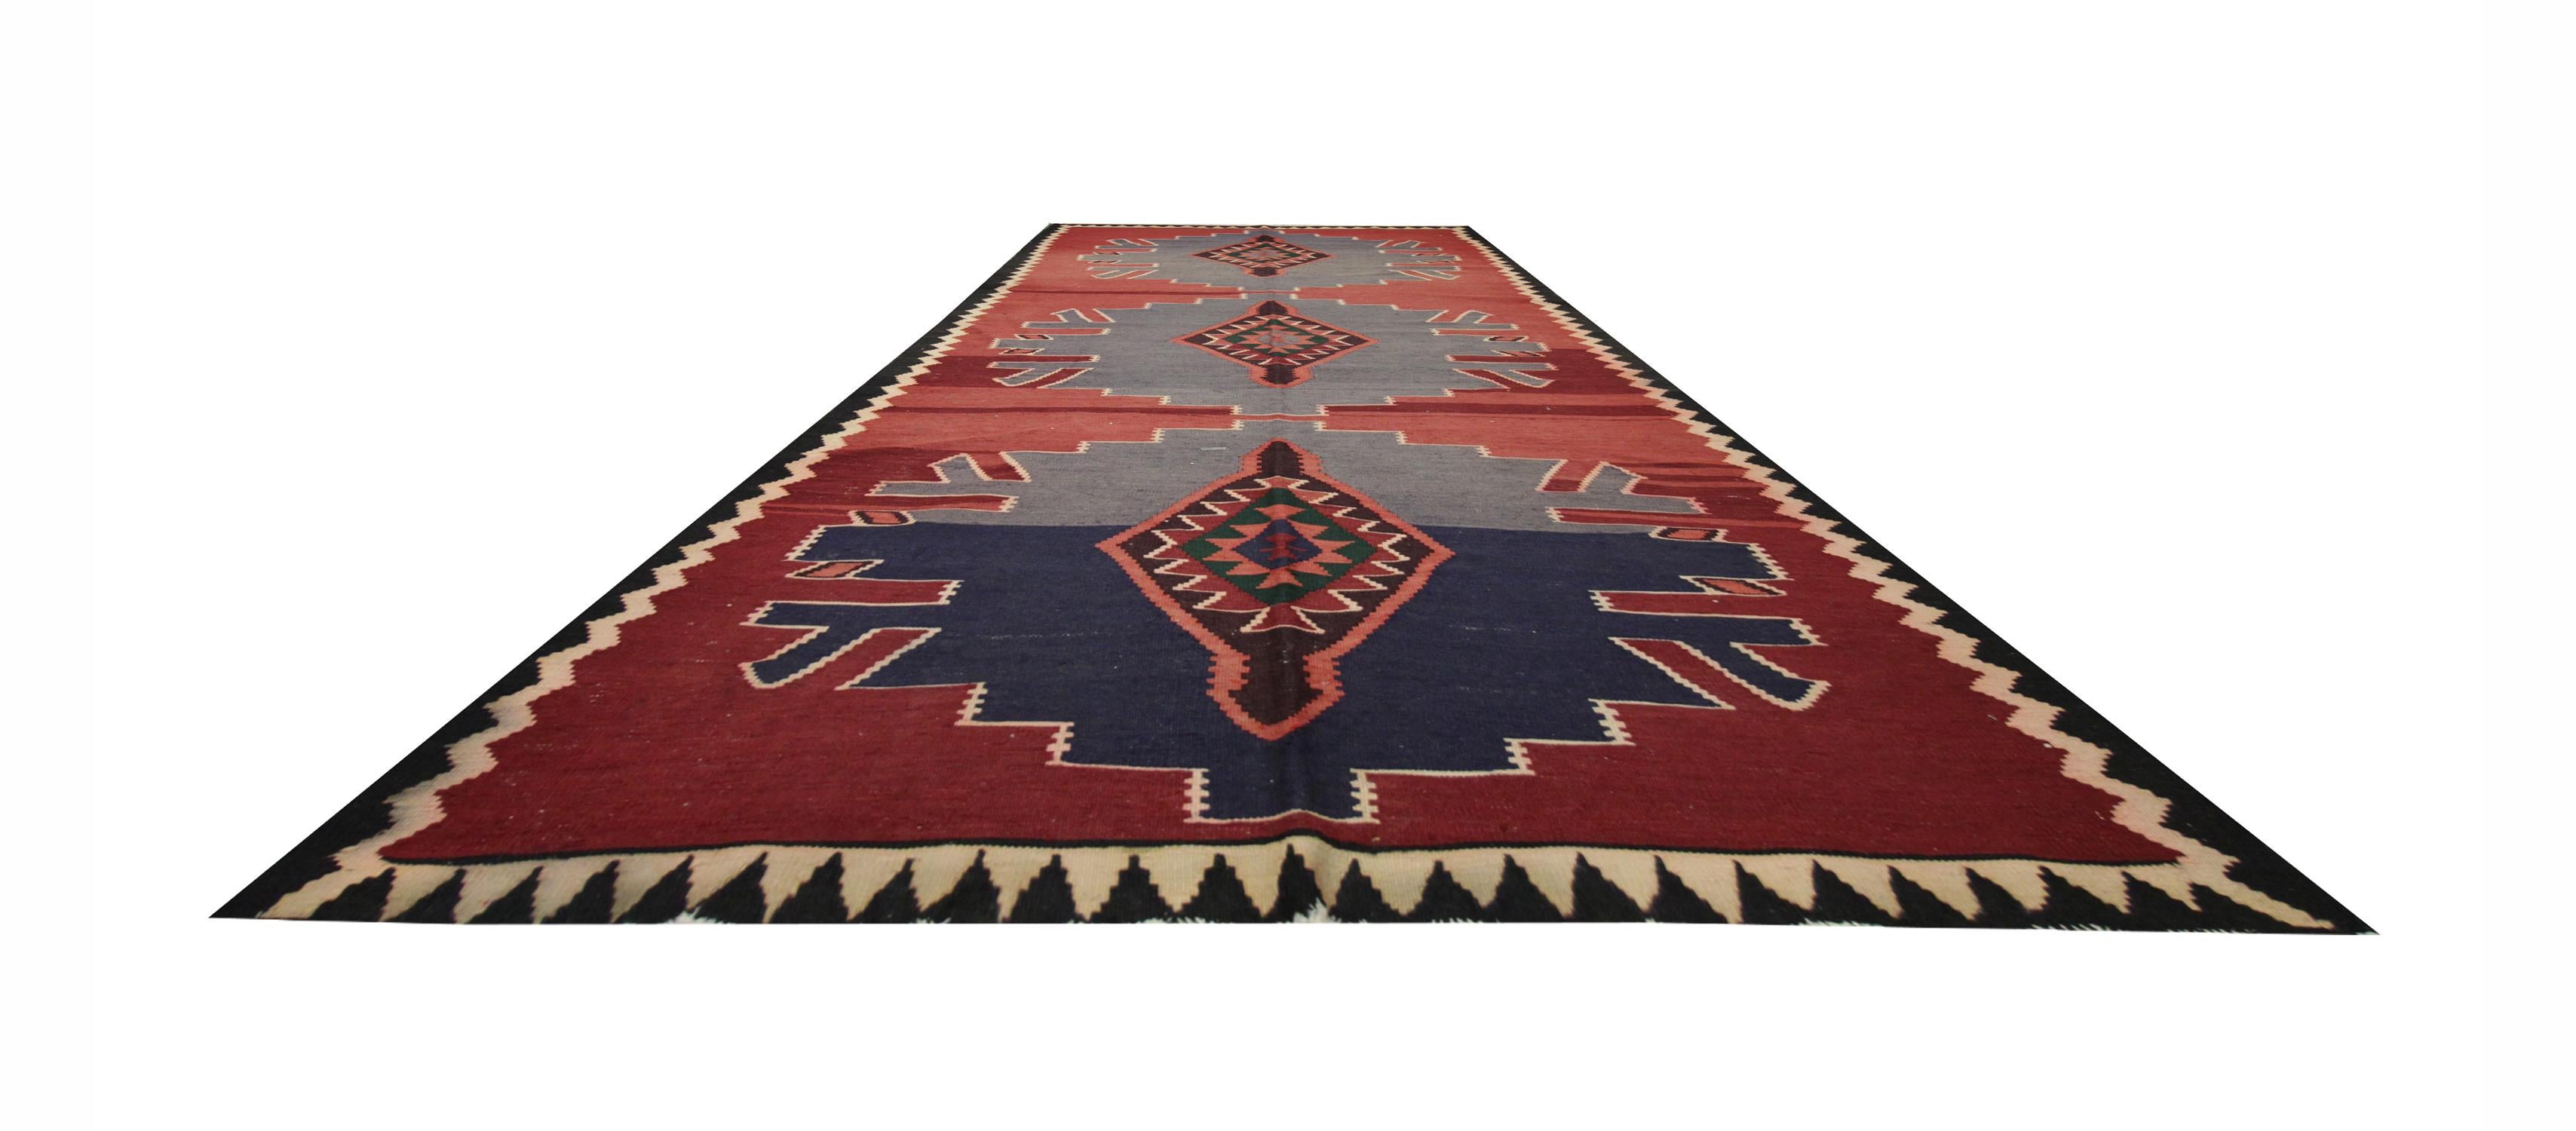 This fine wool area rug was woven by hand in the 1960s/70s with a tribal design. Woven on a rich red background with three large medallions in accents of deep blue and brown. The bold geometric design and simple colour palette make this piece the